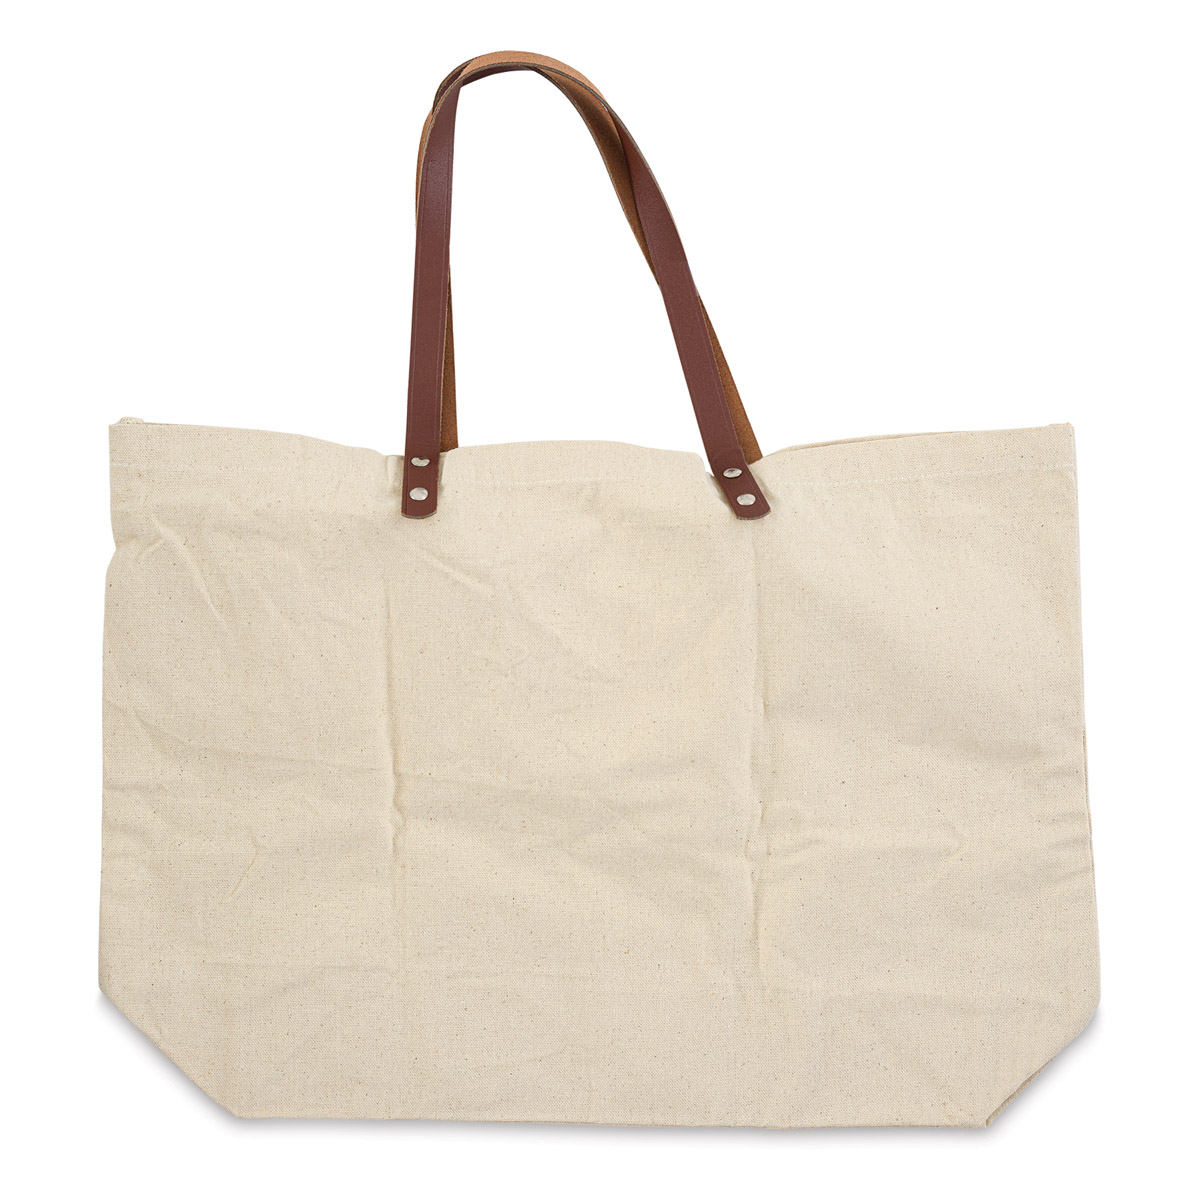 Leather Handle Canvas Tote | BLICK Art Materials